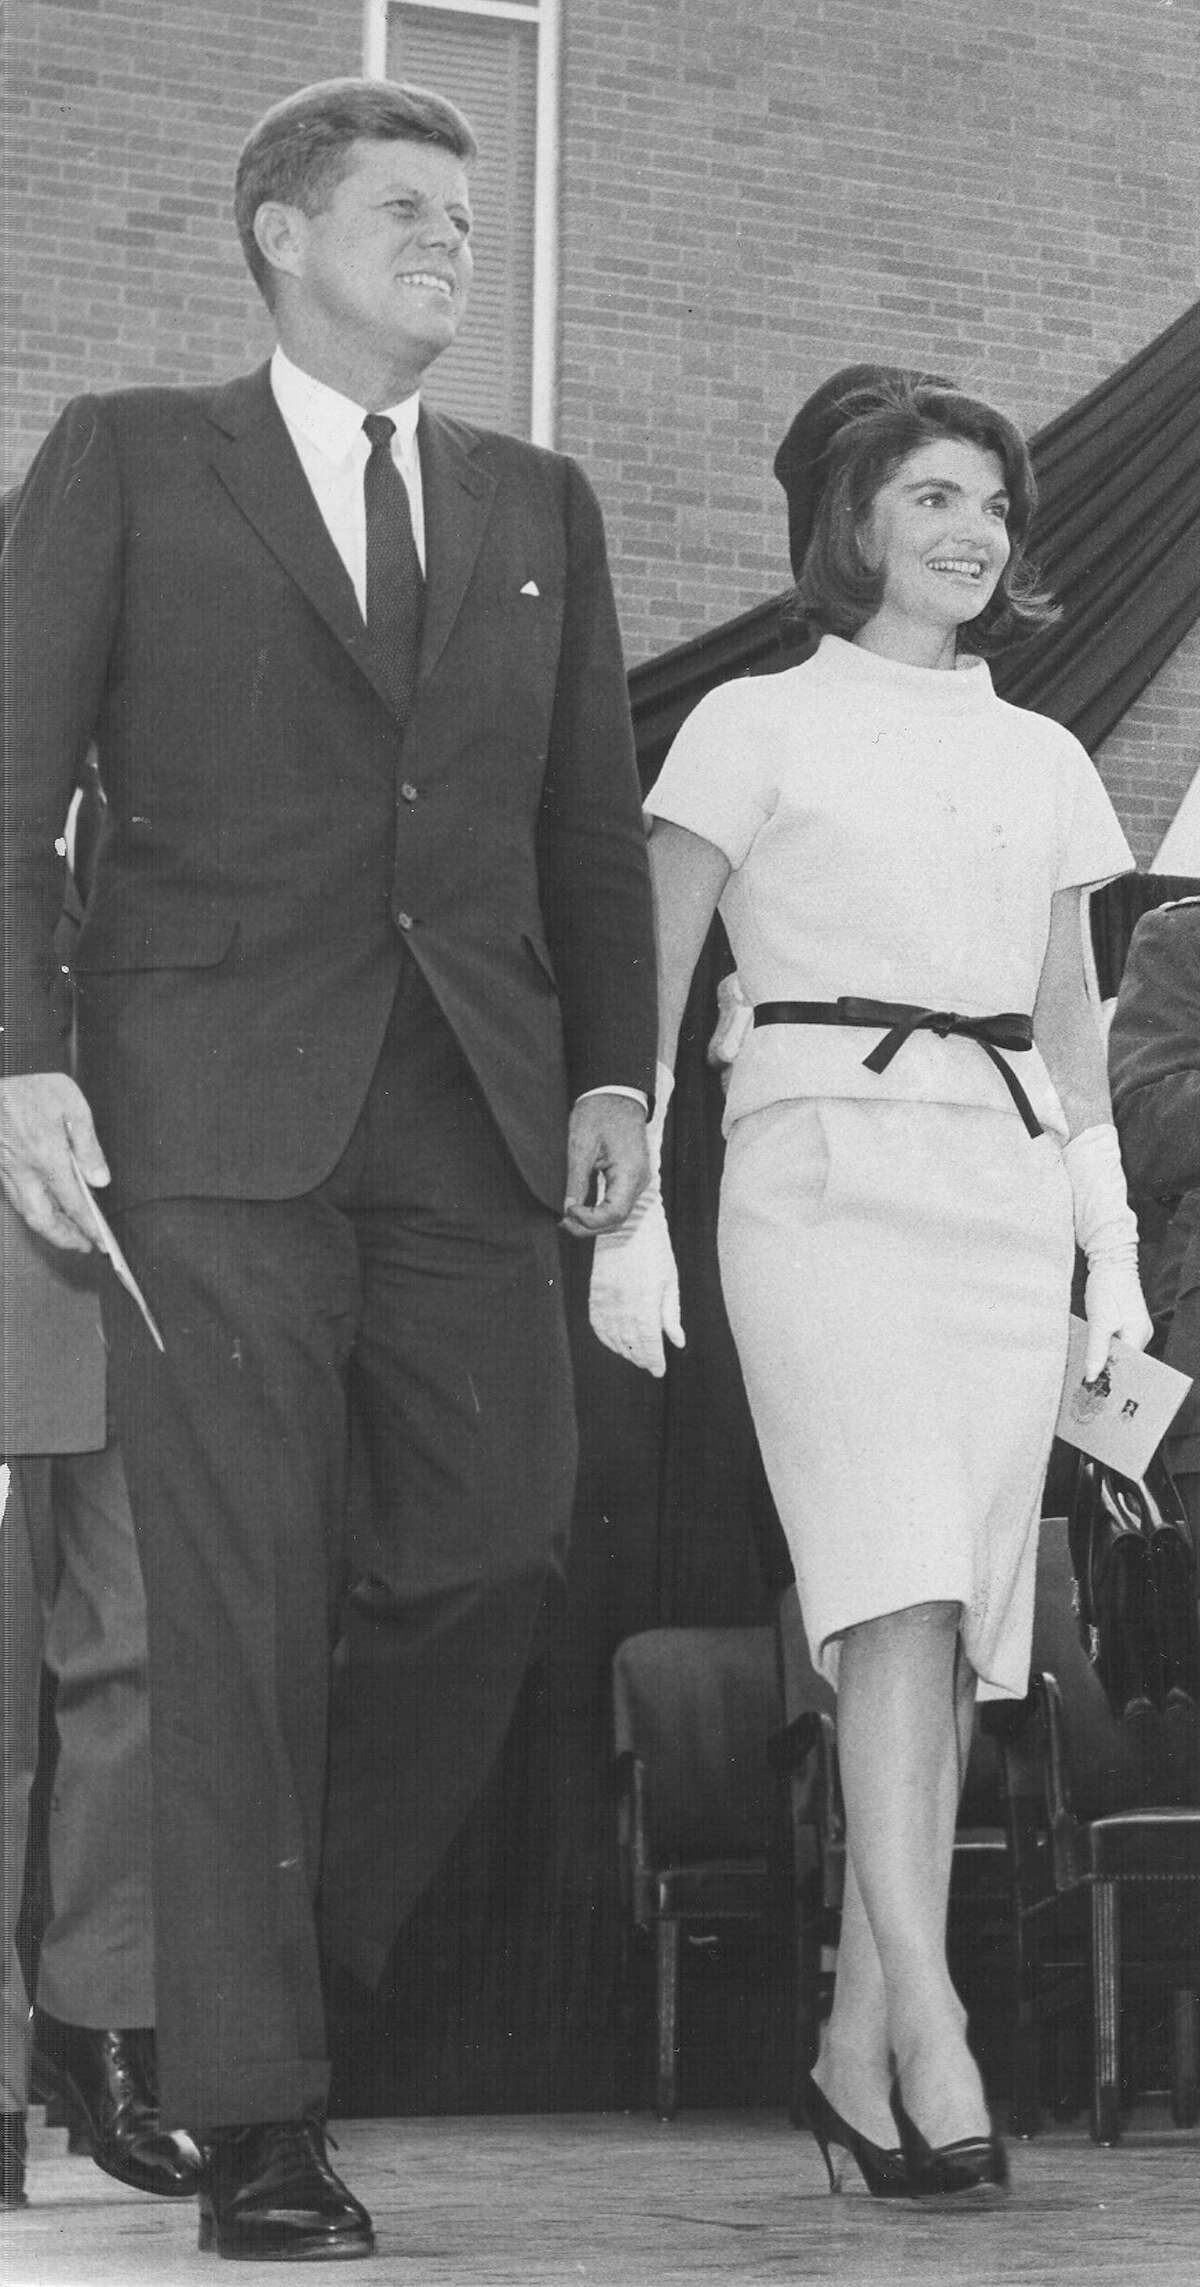 Locals recall San Antonio visit from the Kennedys